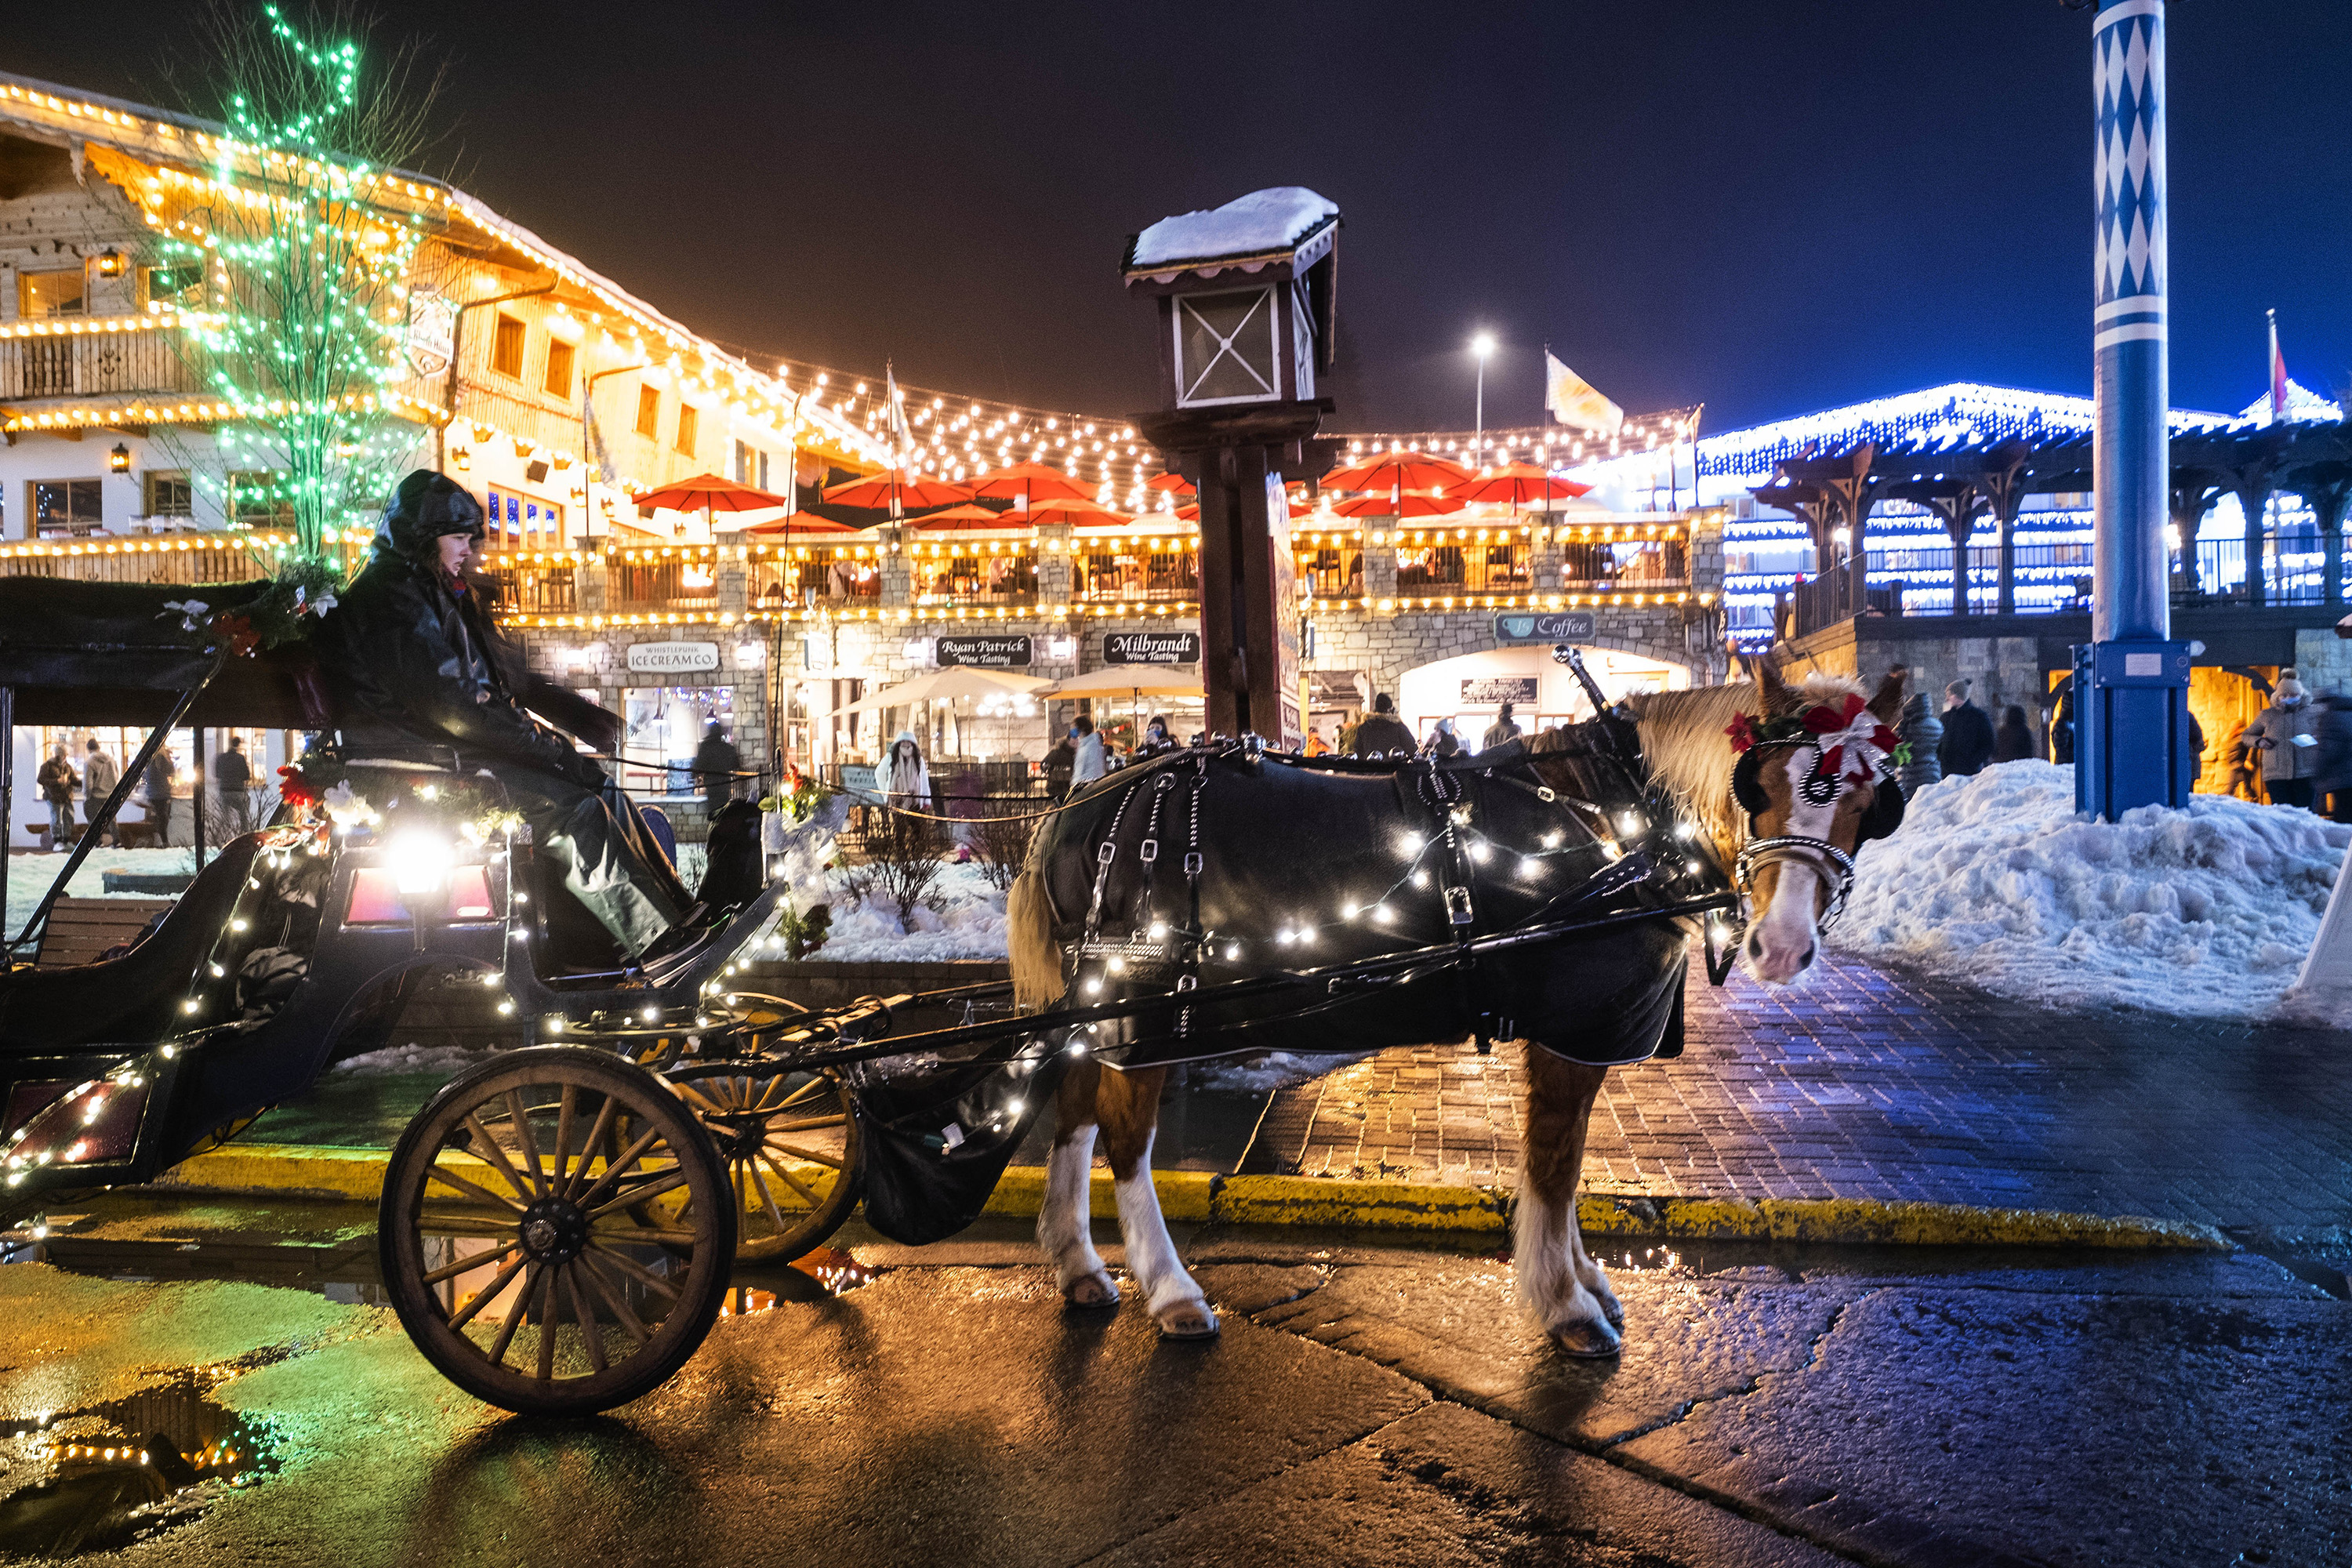 A horse and carriage is lit up in downtown Leavenworth, offering rides through the city's streets .